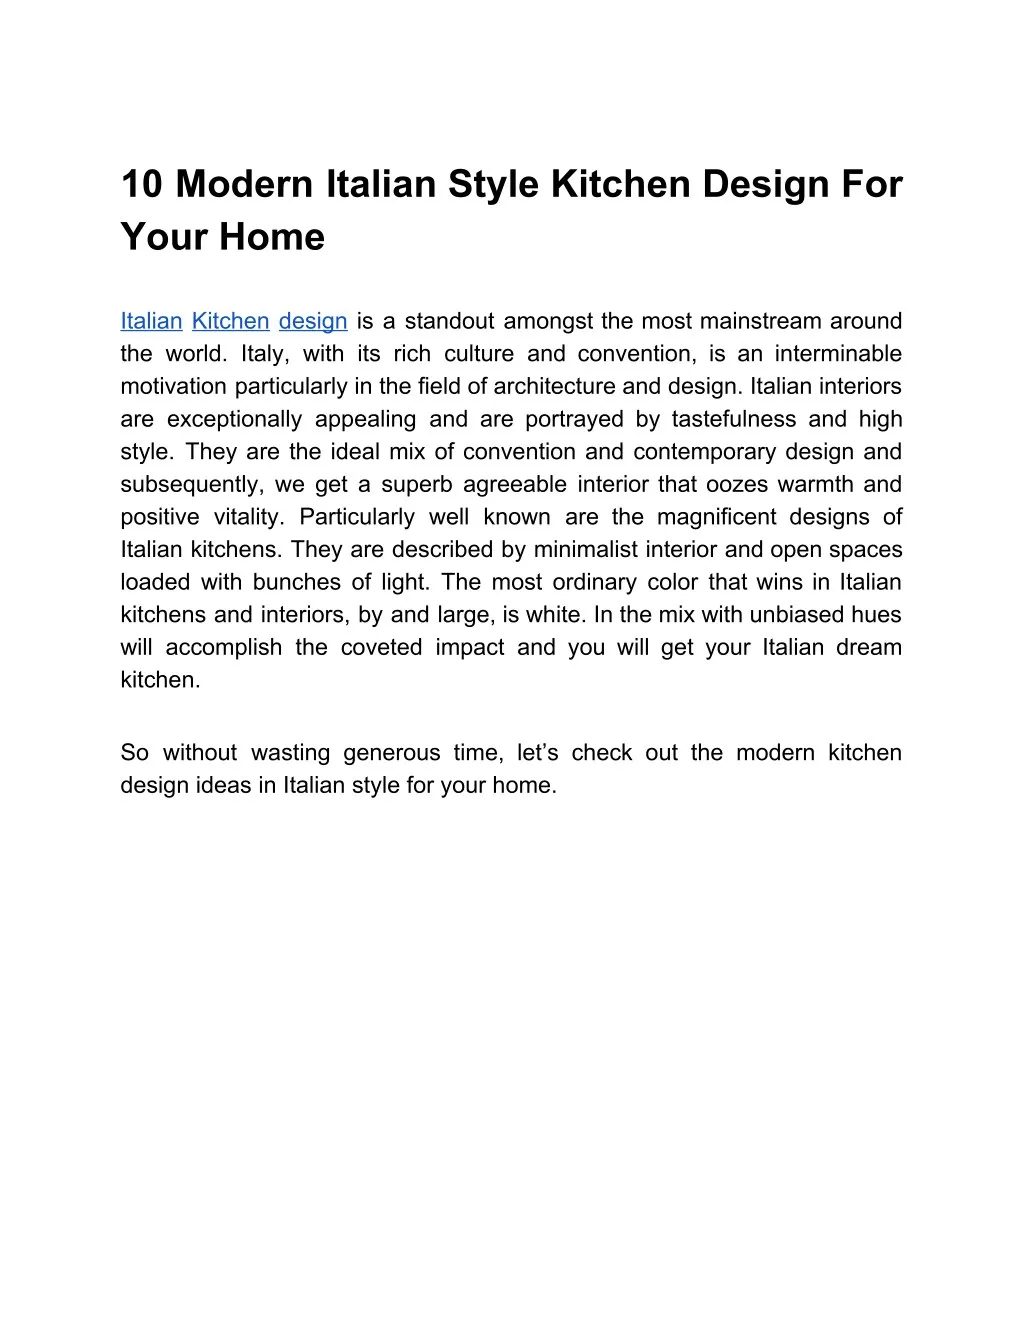 10 modern italian style kitchen design for your